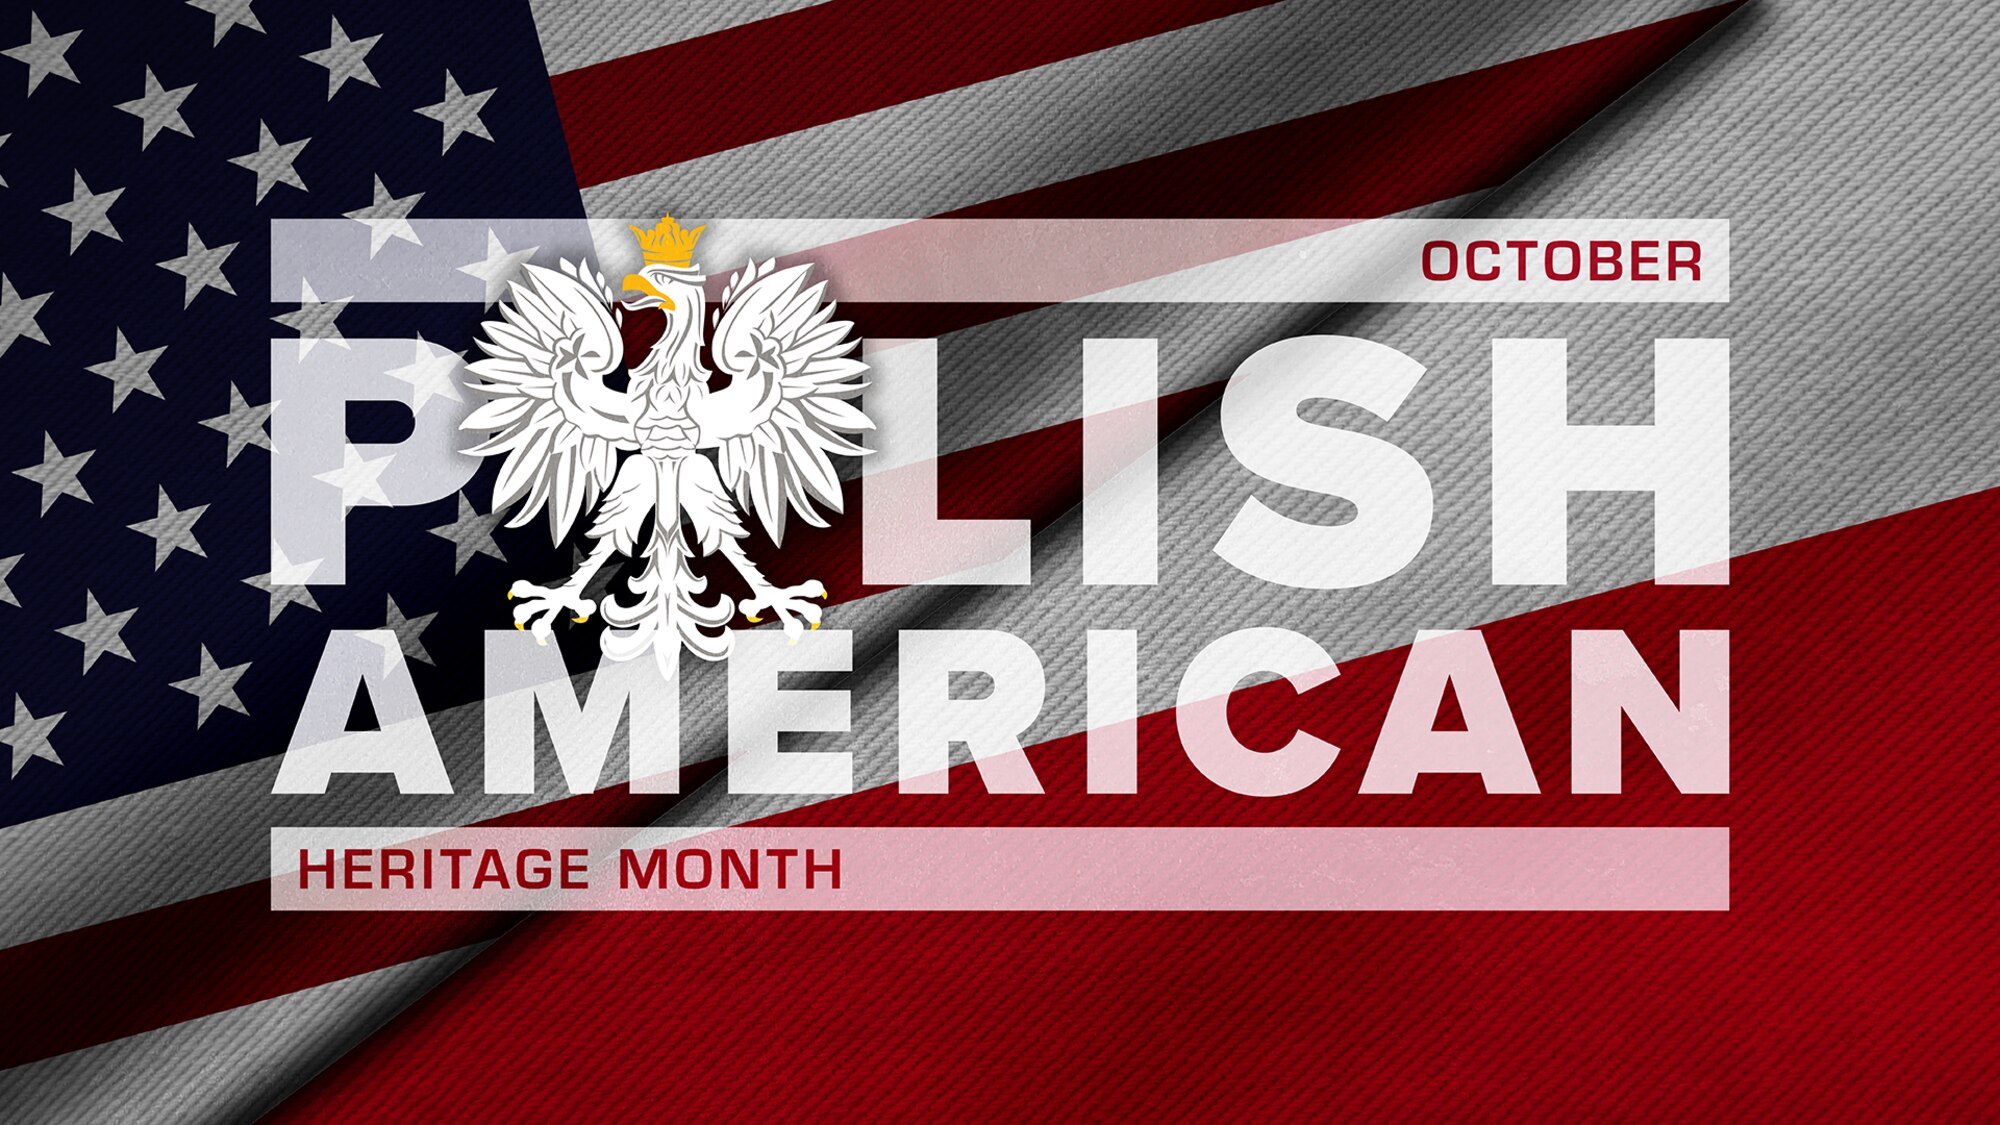 Polish American Heritage Month observance graphic